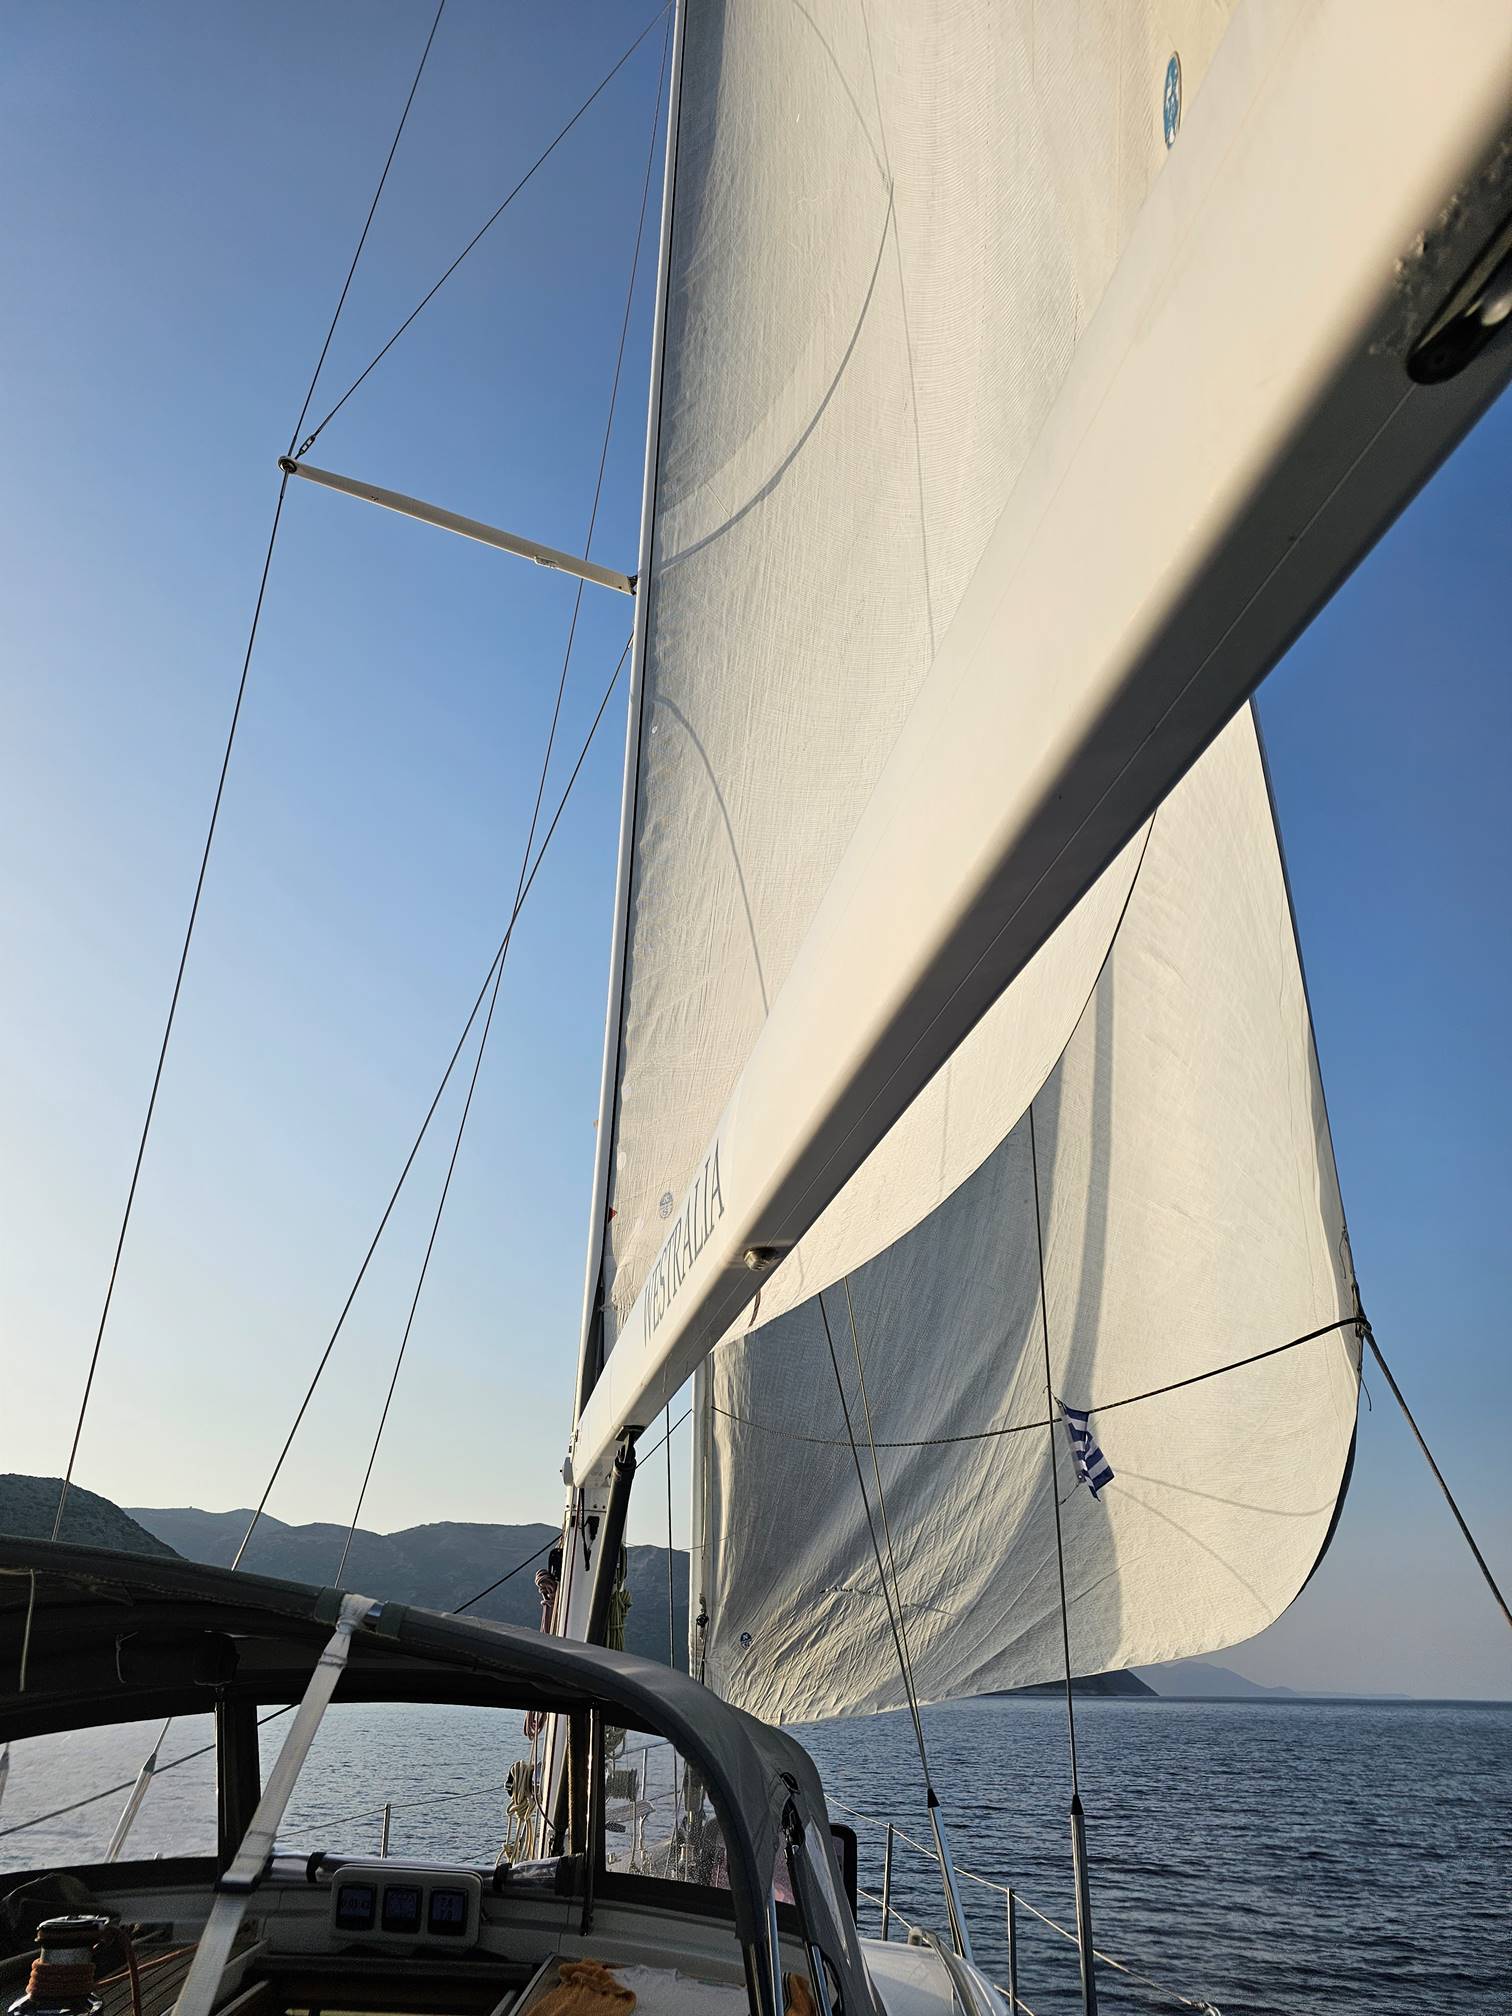 A sailboat with a mast

Description automatically generated